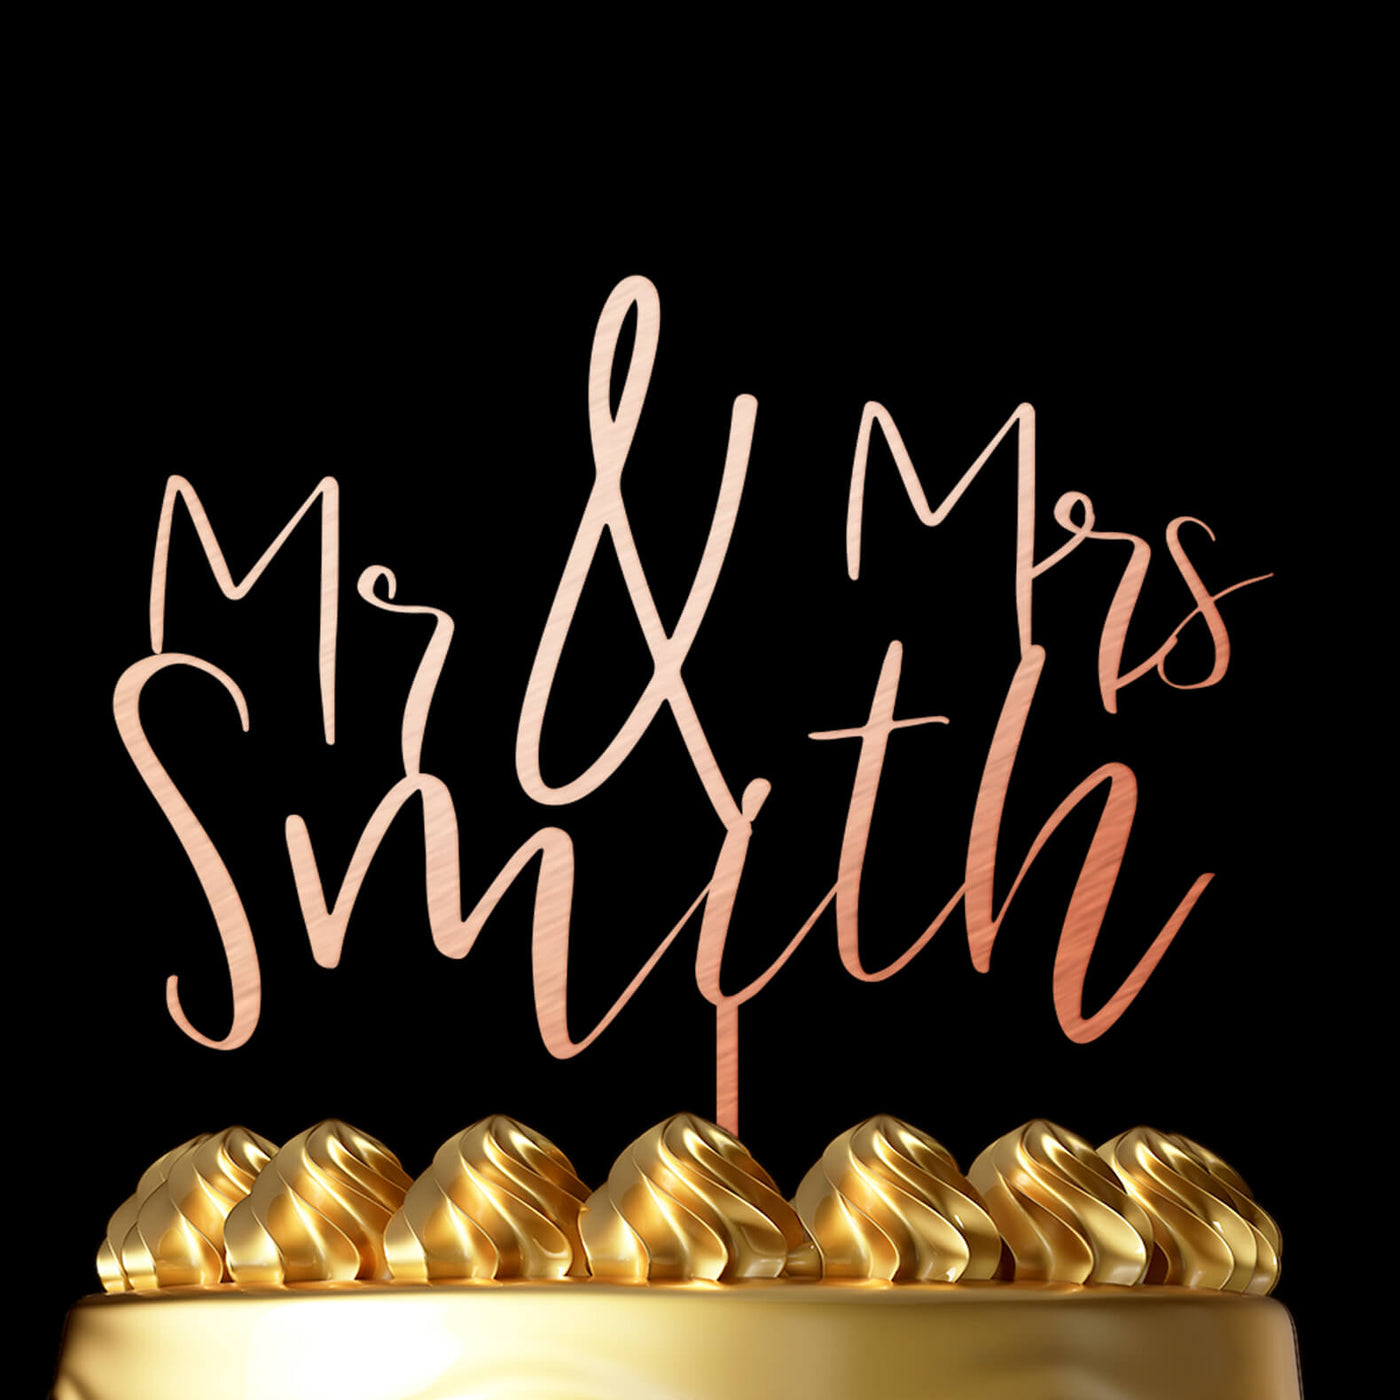 Personalized Cake Topper Lee - Wedding Cake Topper by Luxtomi